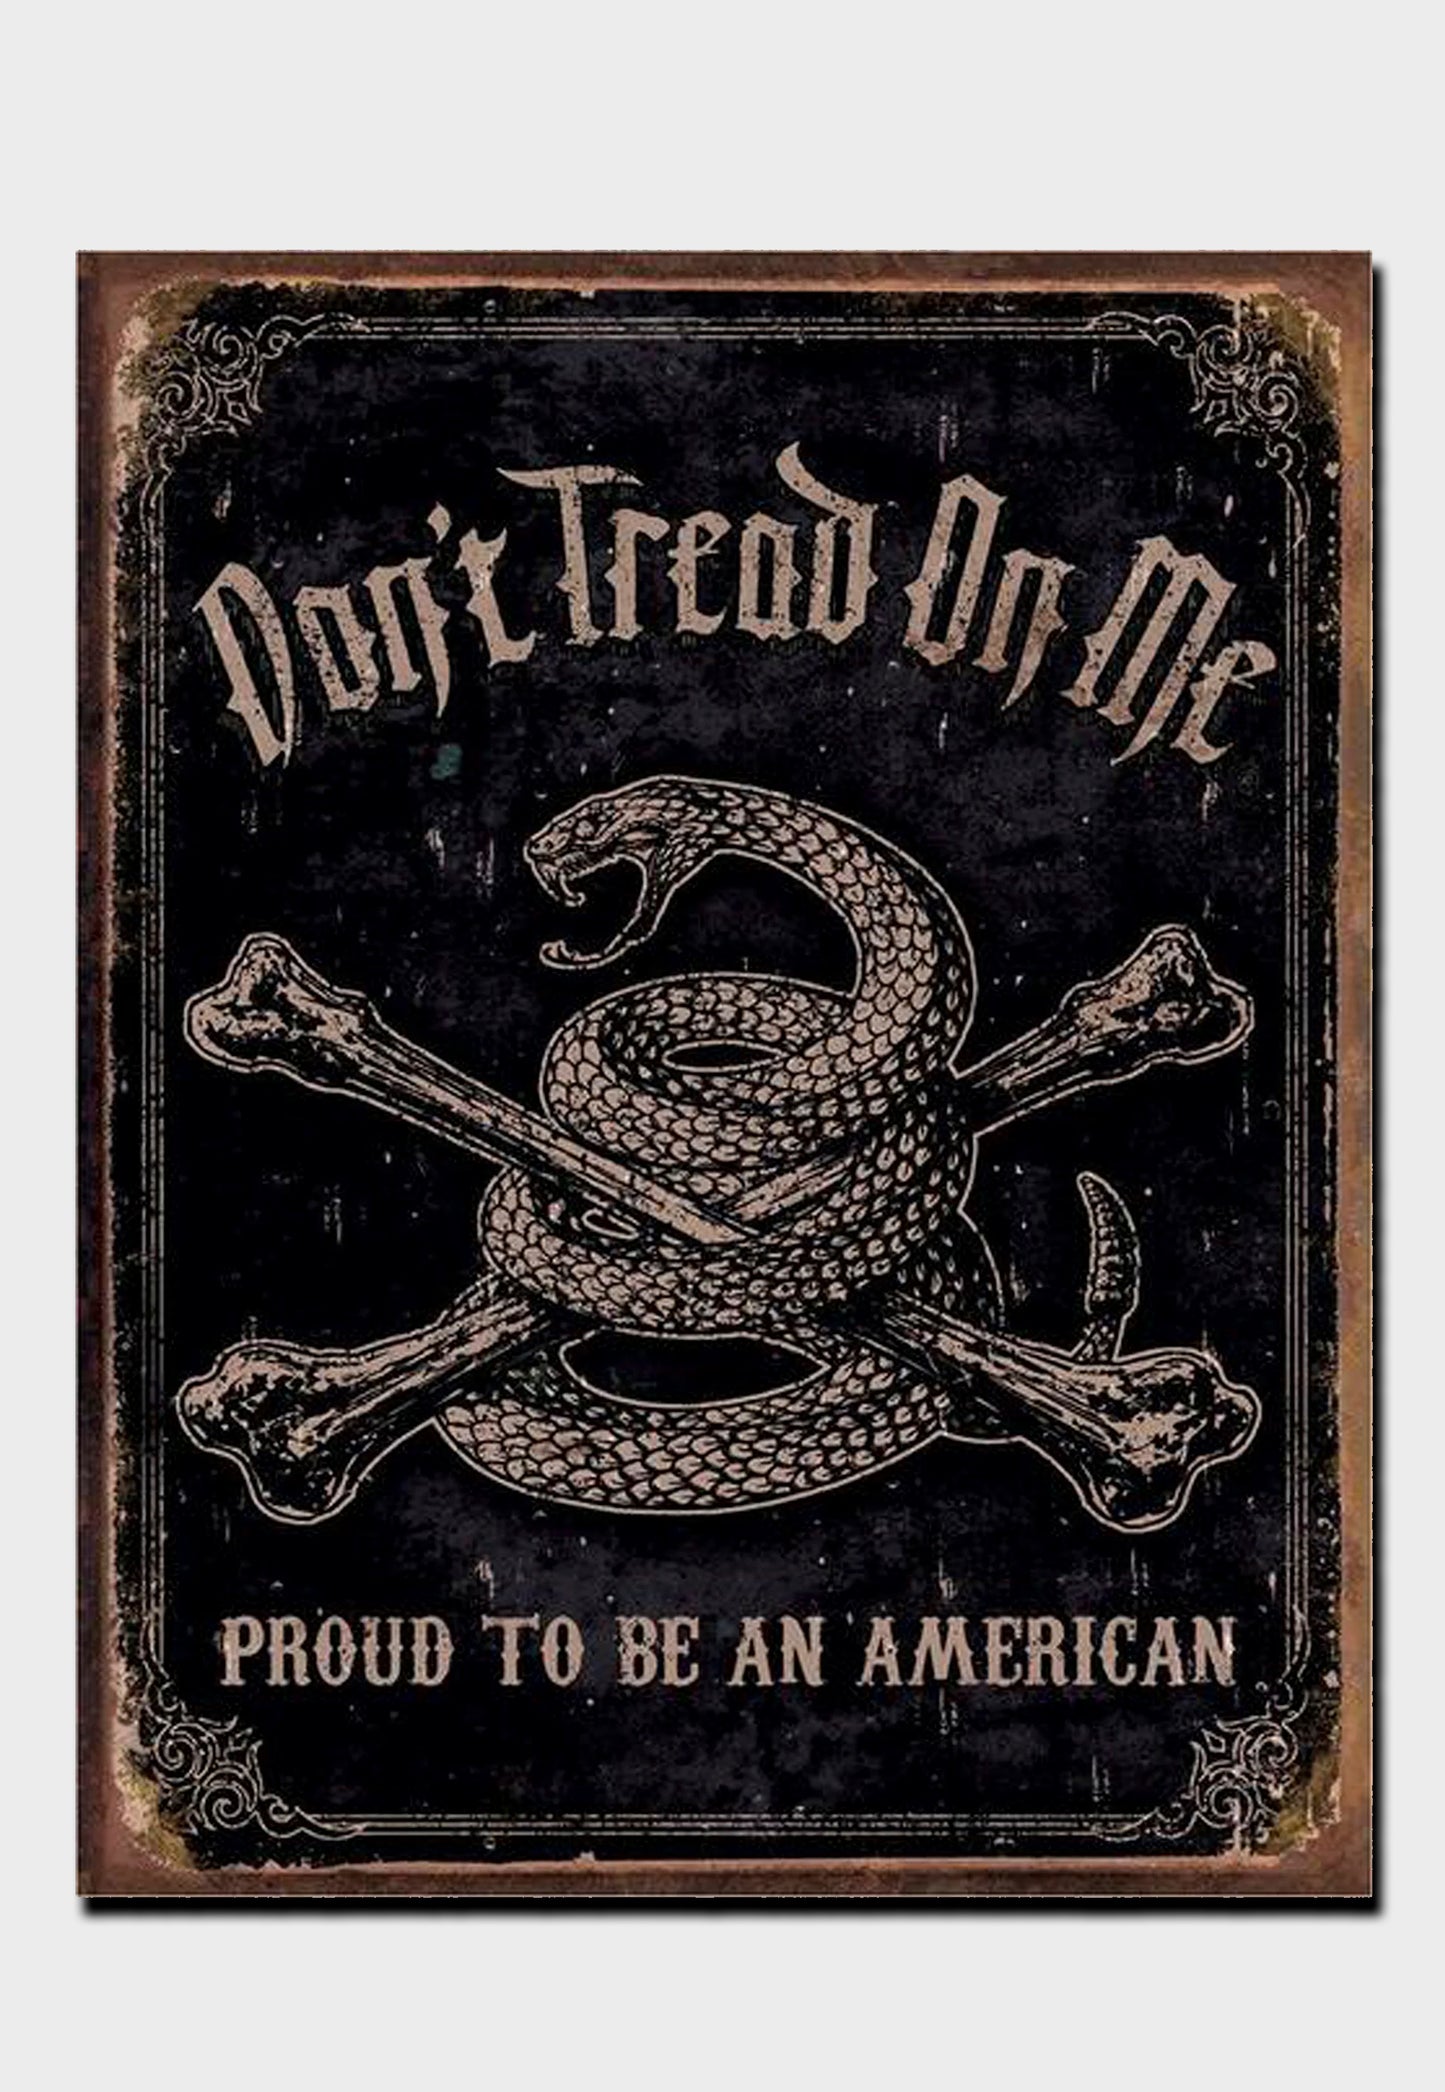 Don't Tread on Me tin sign with snake